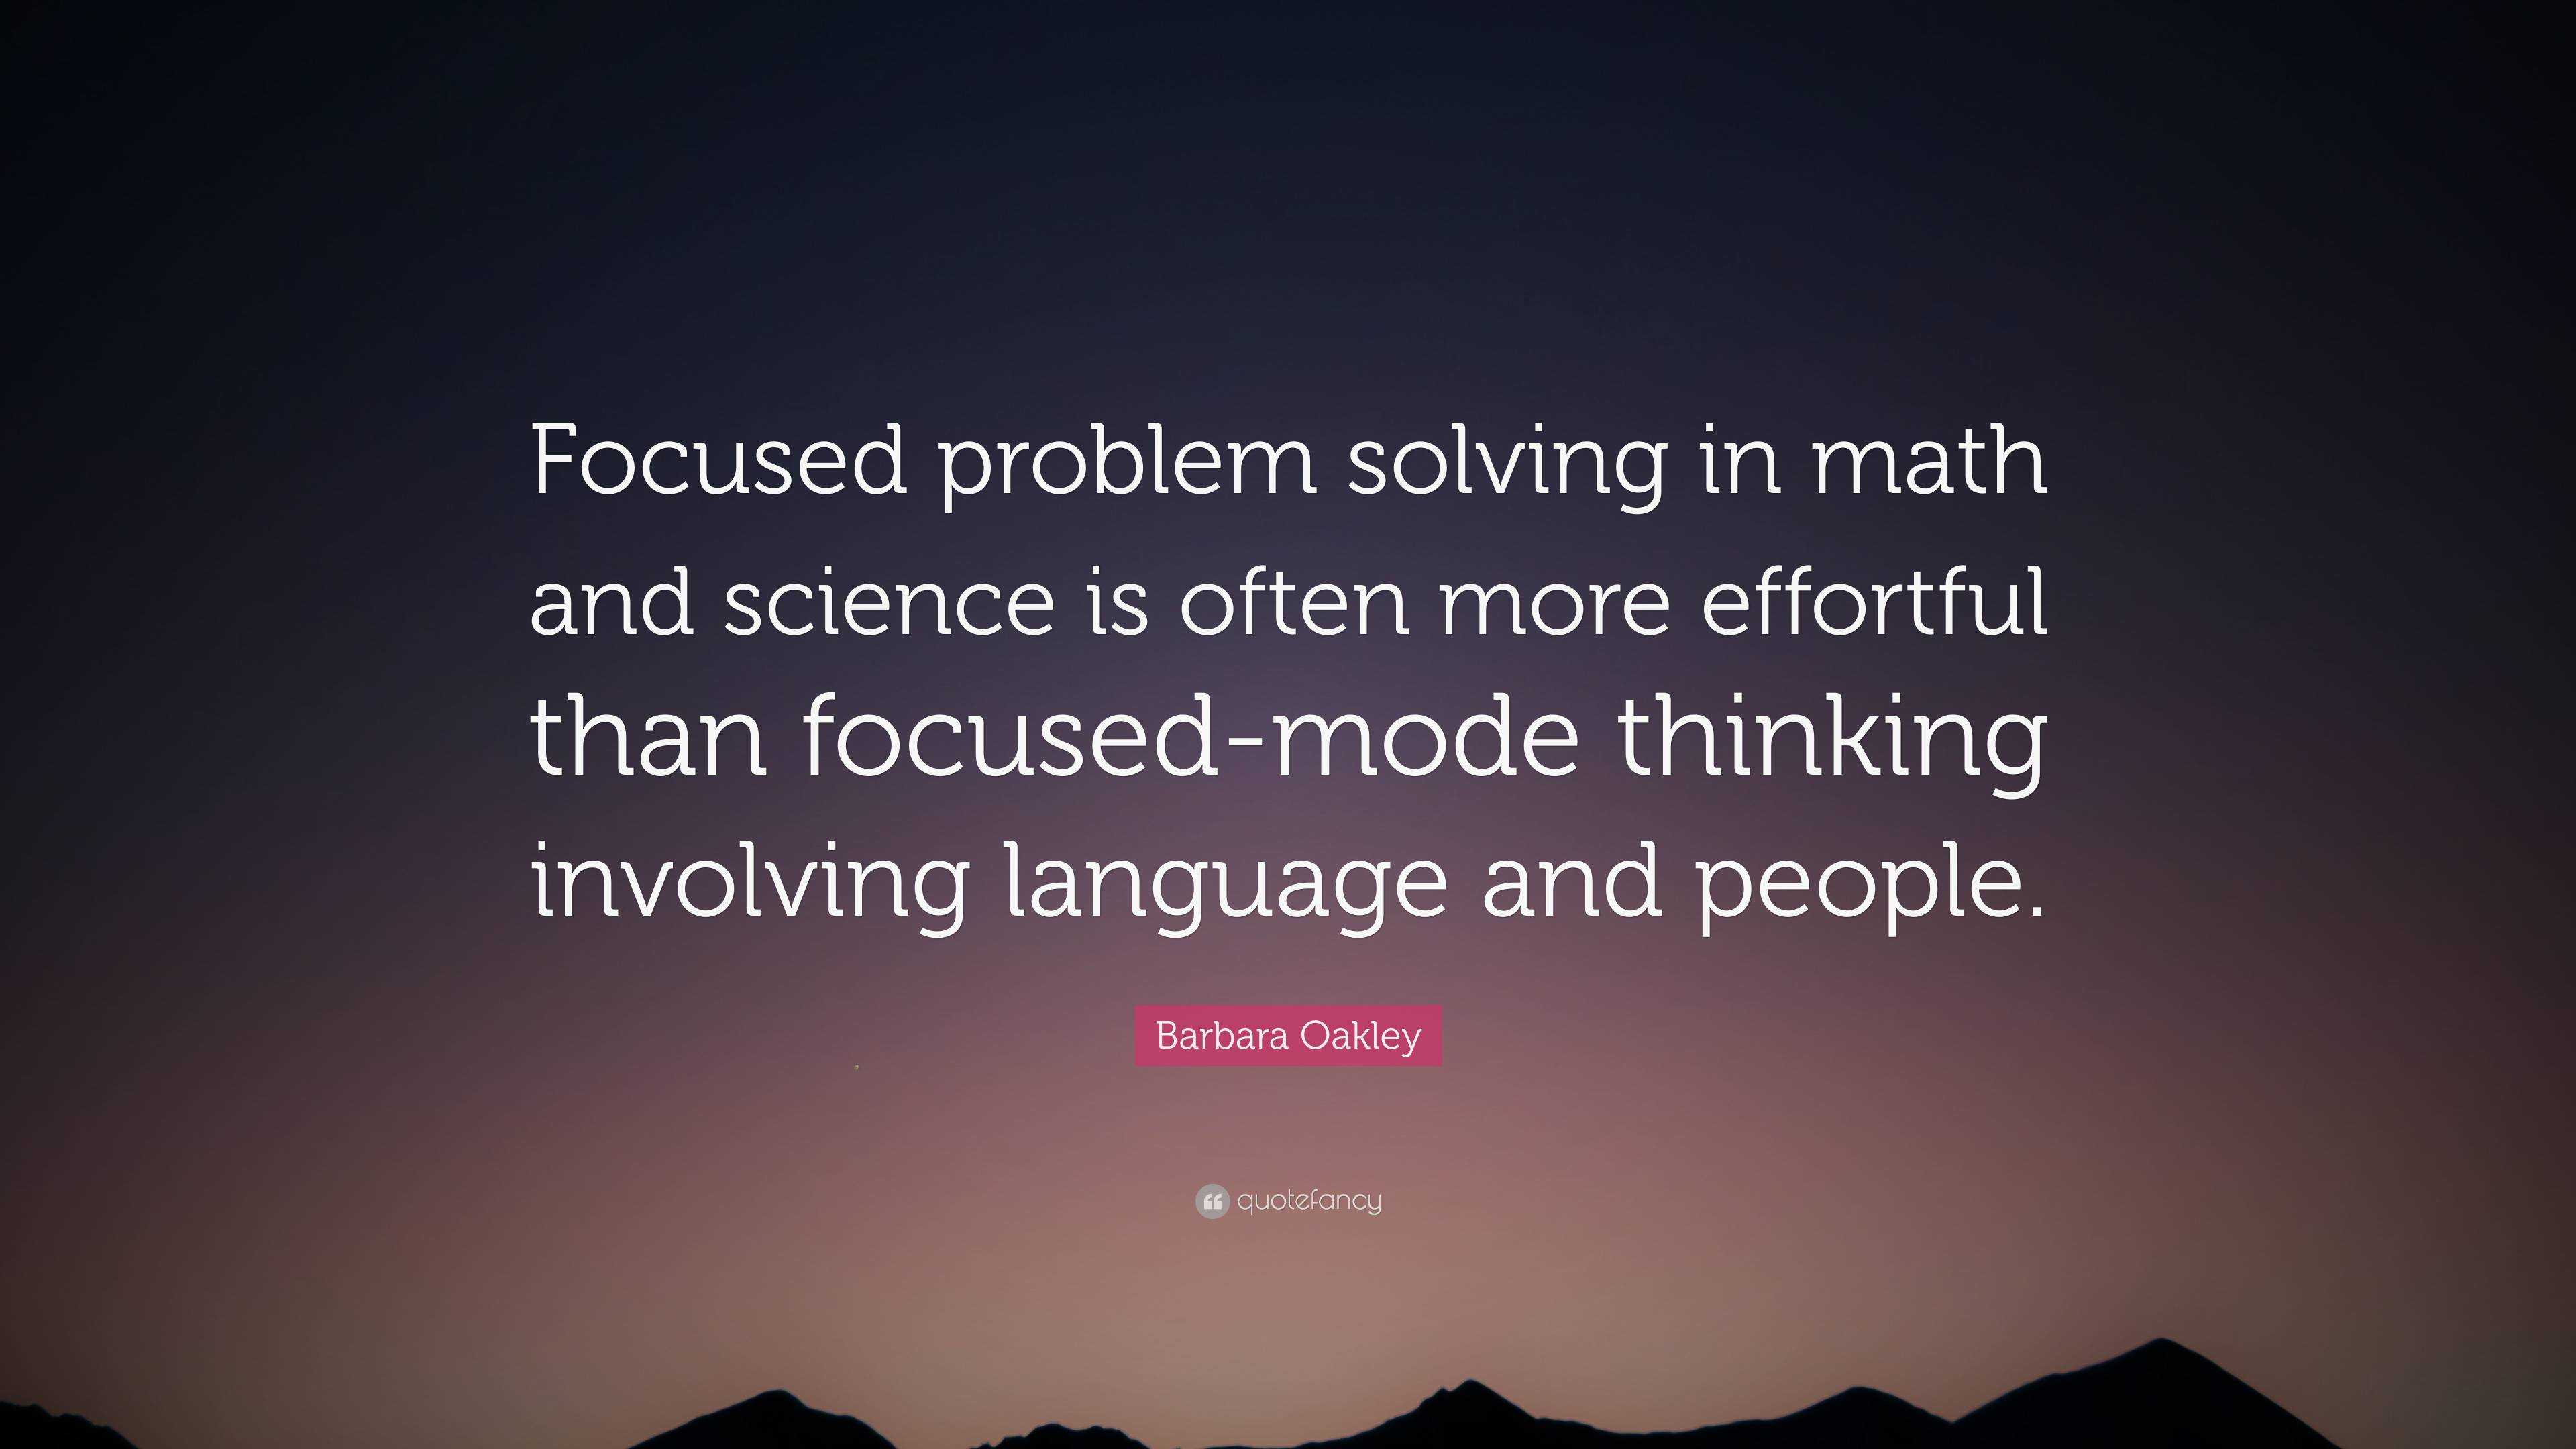 Barbara Oakley Quote: “Focused problem solving in math and science is often  more effortful than focused-mode thinking involving language and pe...”